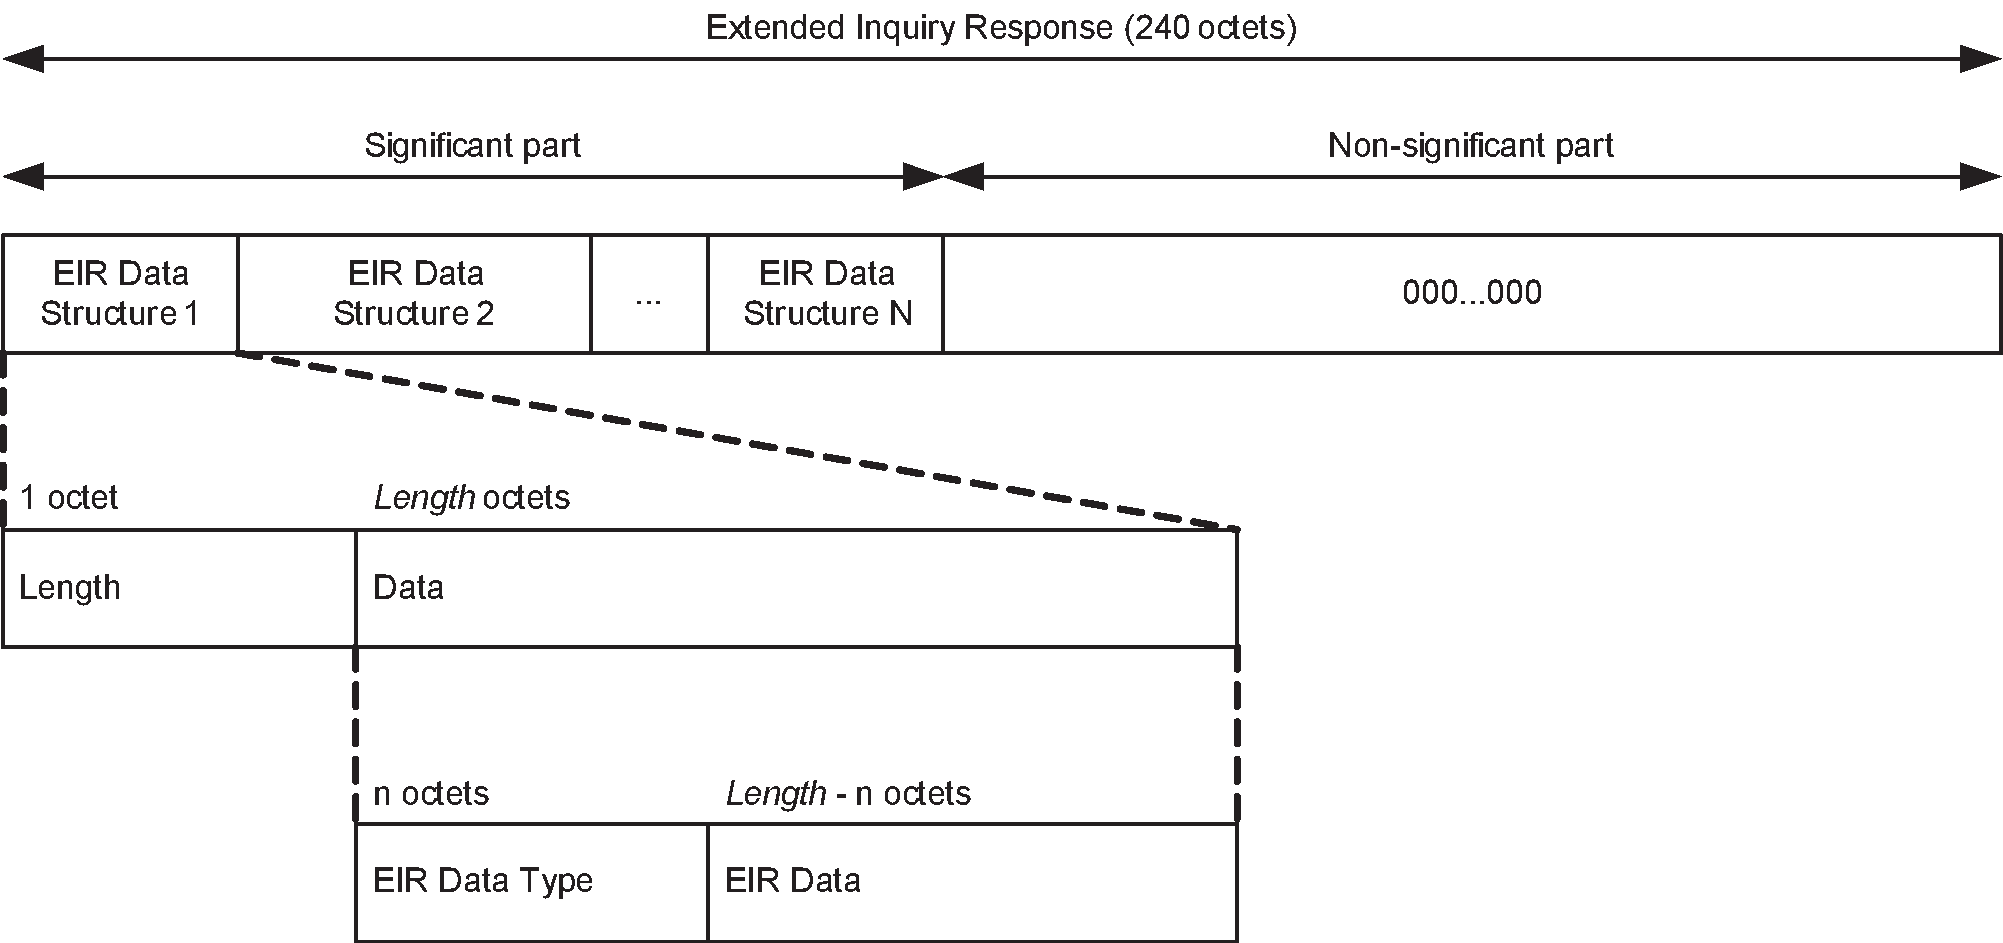 Extended inquiry response data format